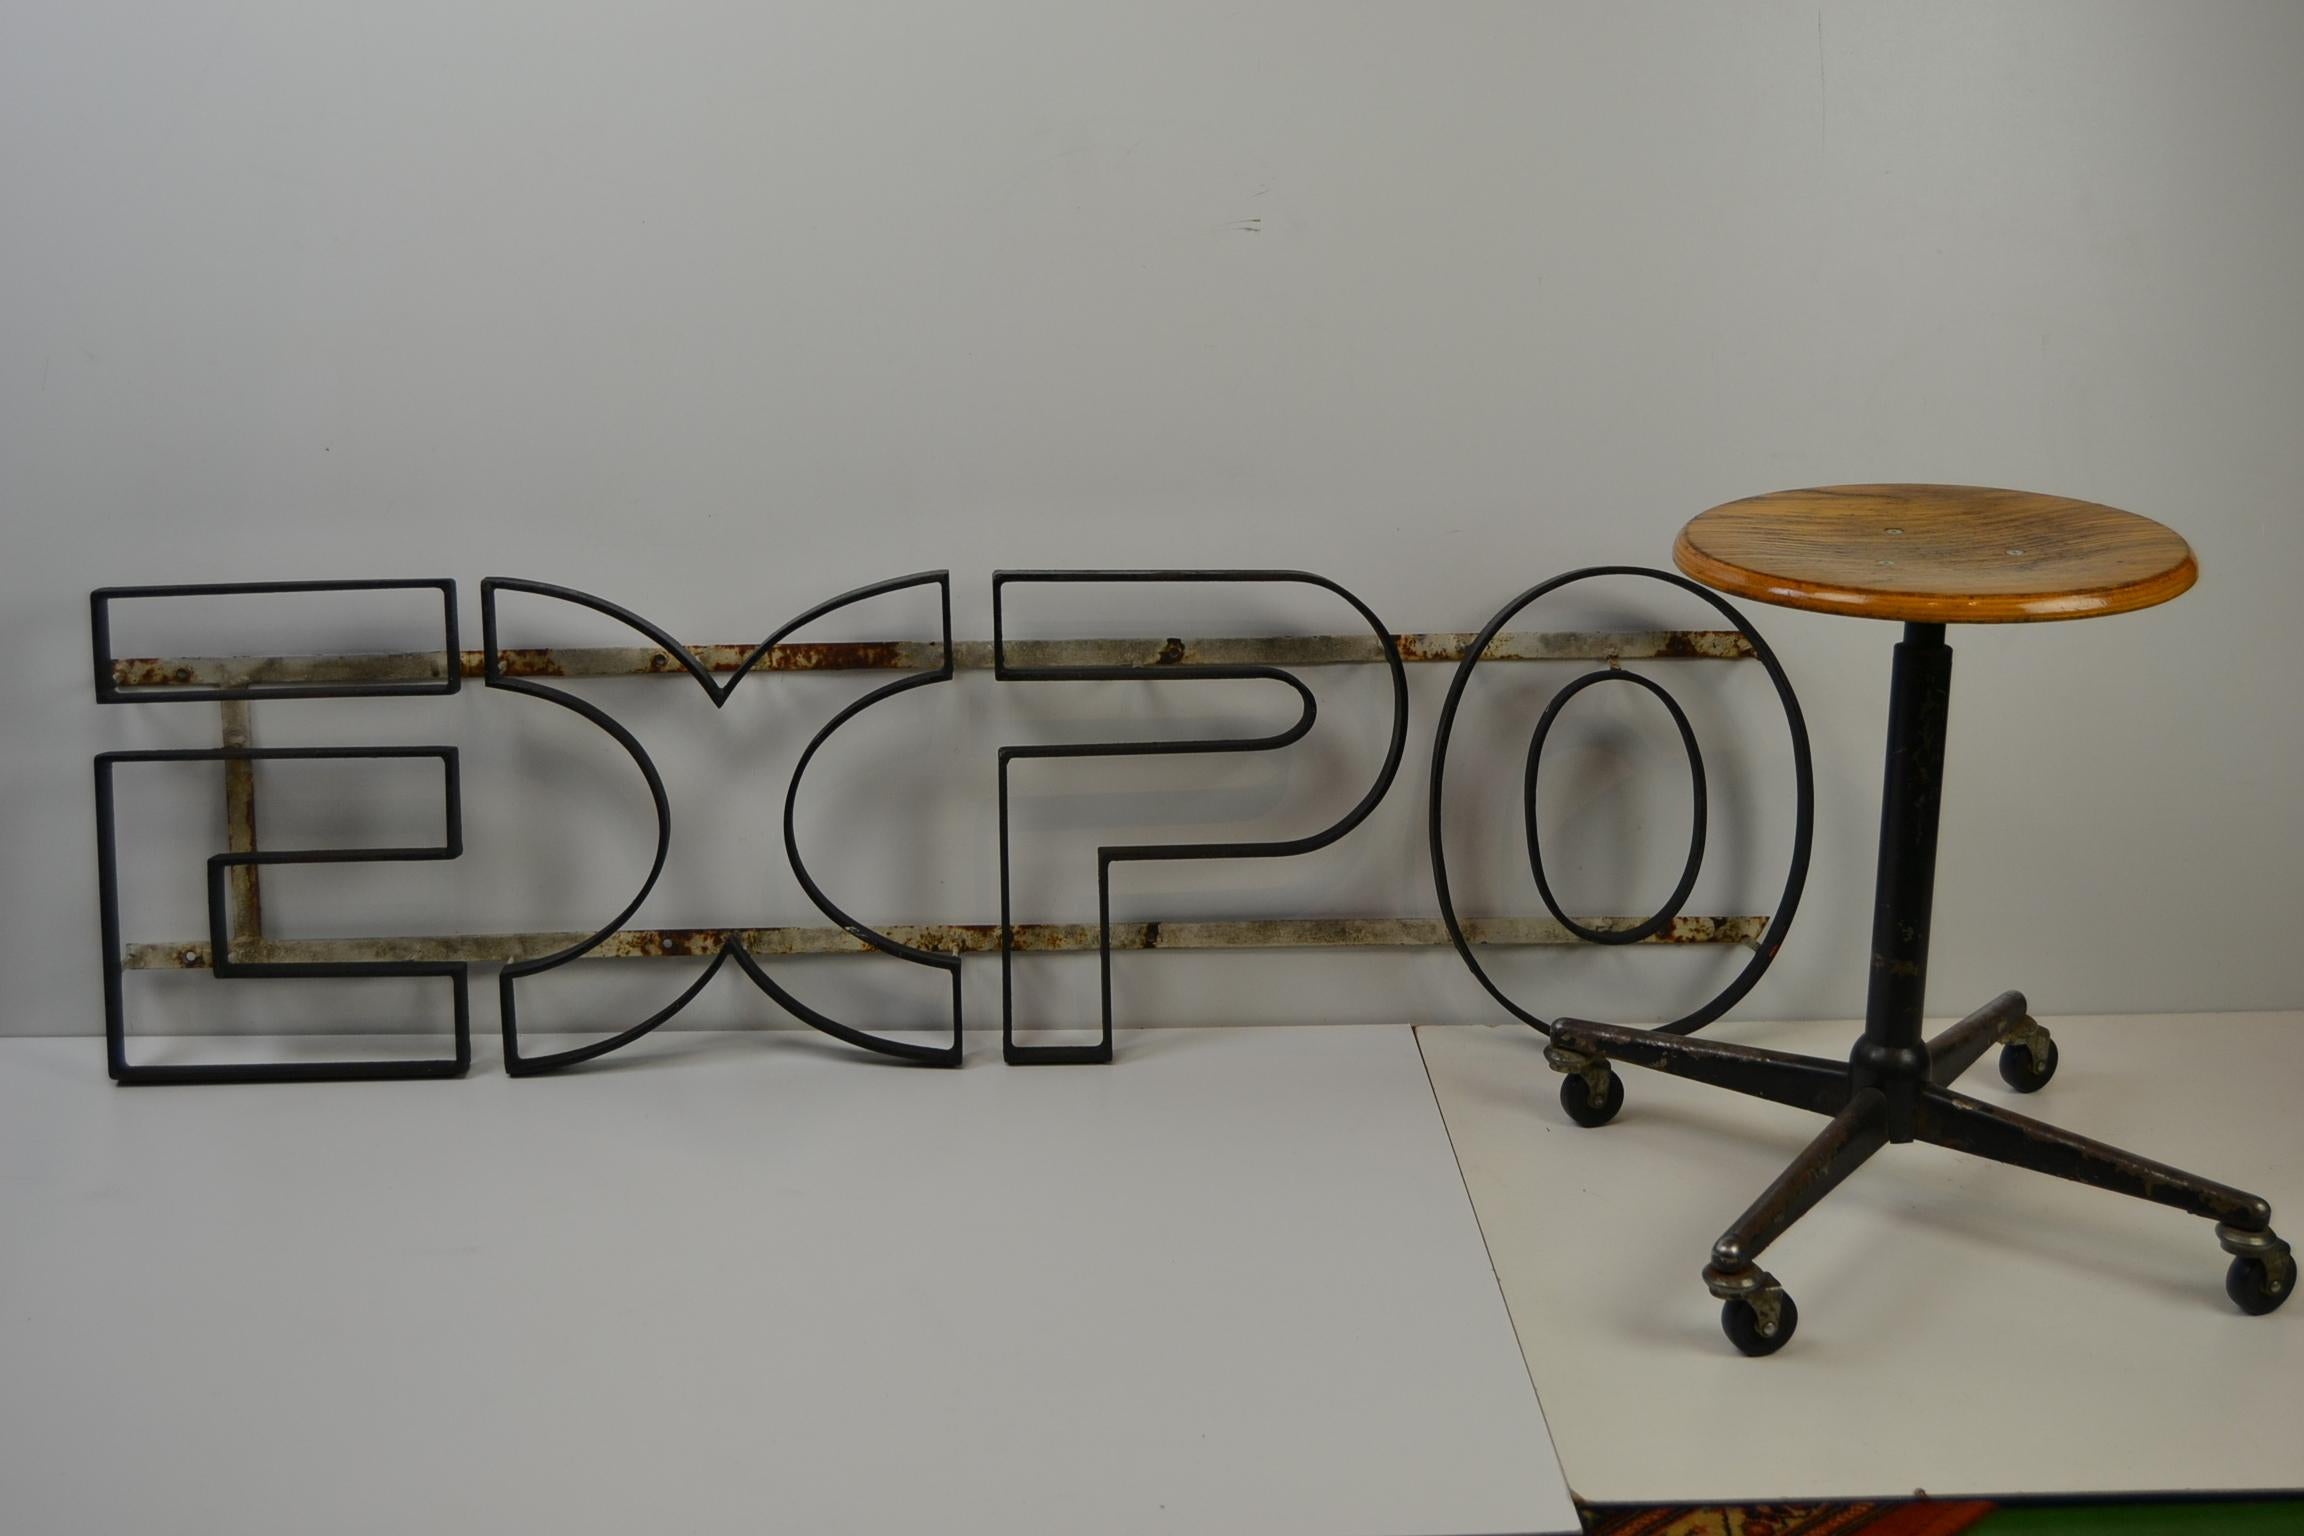 Iron EXPO sign, 1950s, Belgium awesome vintage EXPO - Sign from the 1950s.
This late Art Deco sign is made of solid metal.
Comes from a former exposition building in Ieper Belgium, where many exhibitions took place in the past.
Great shaped large